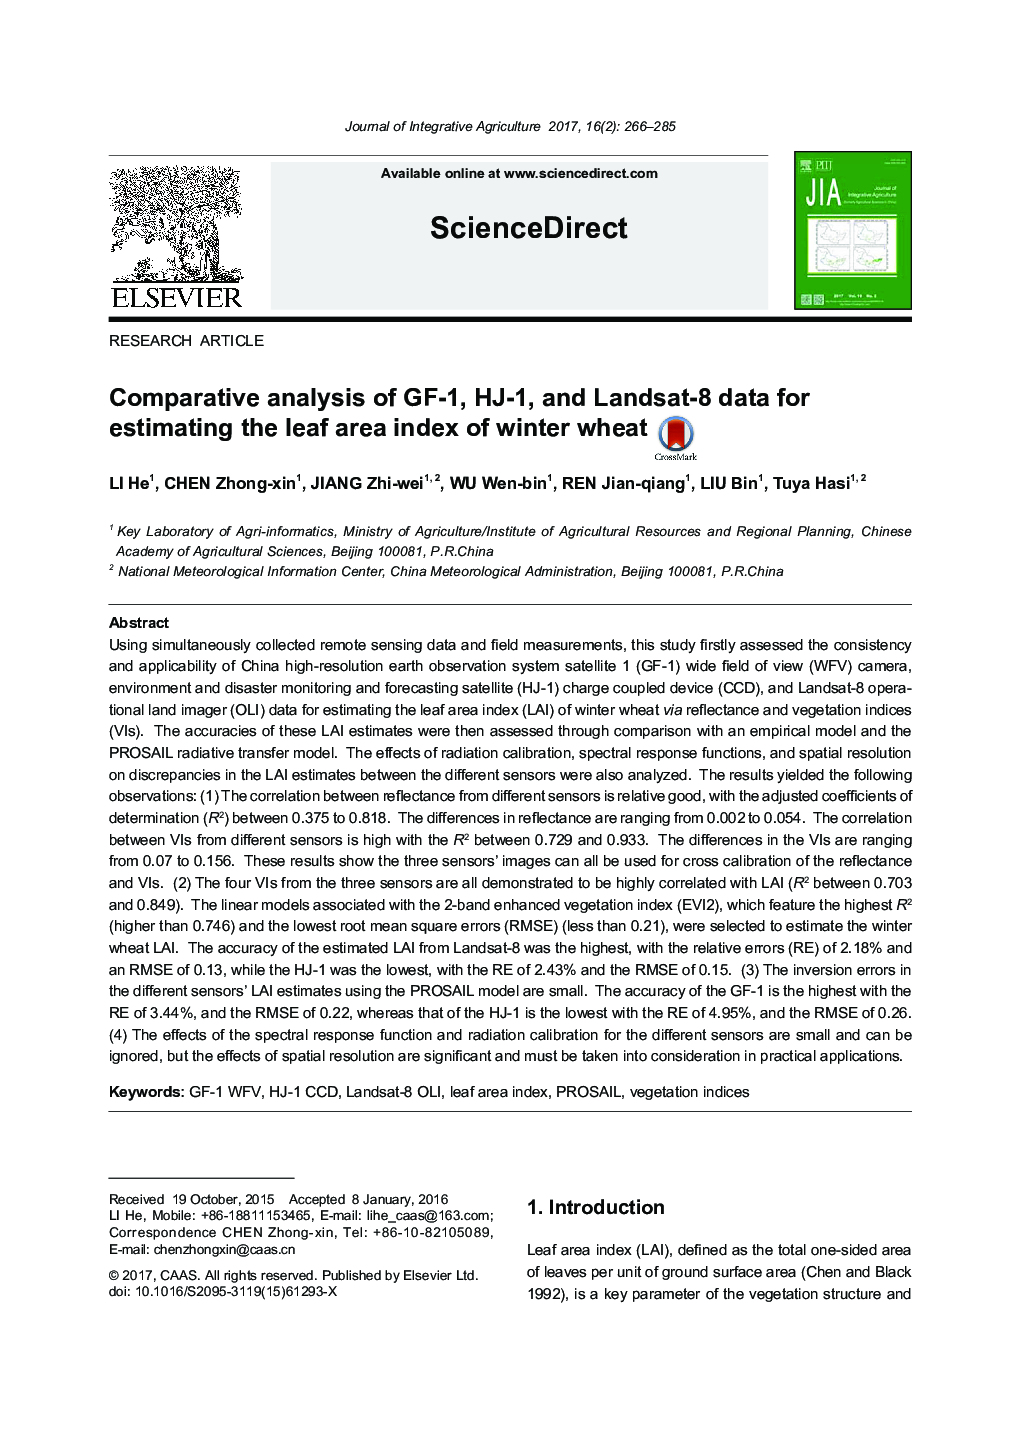 Comparative analysis of GF-1, HJ-1, and Landsat-8 data for estimating the leaf area index of winter wheat